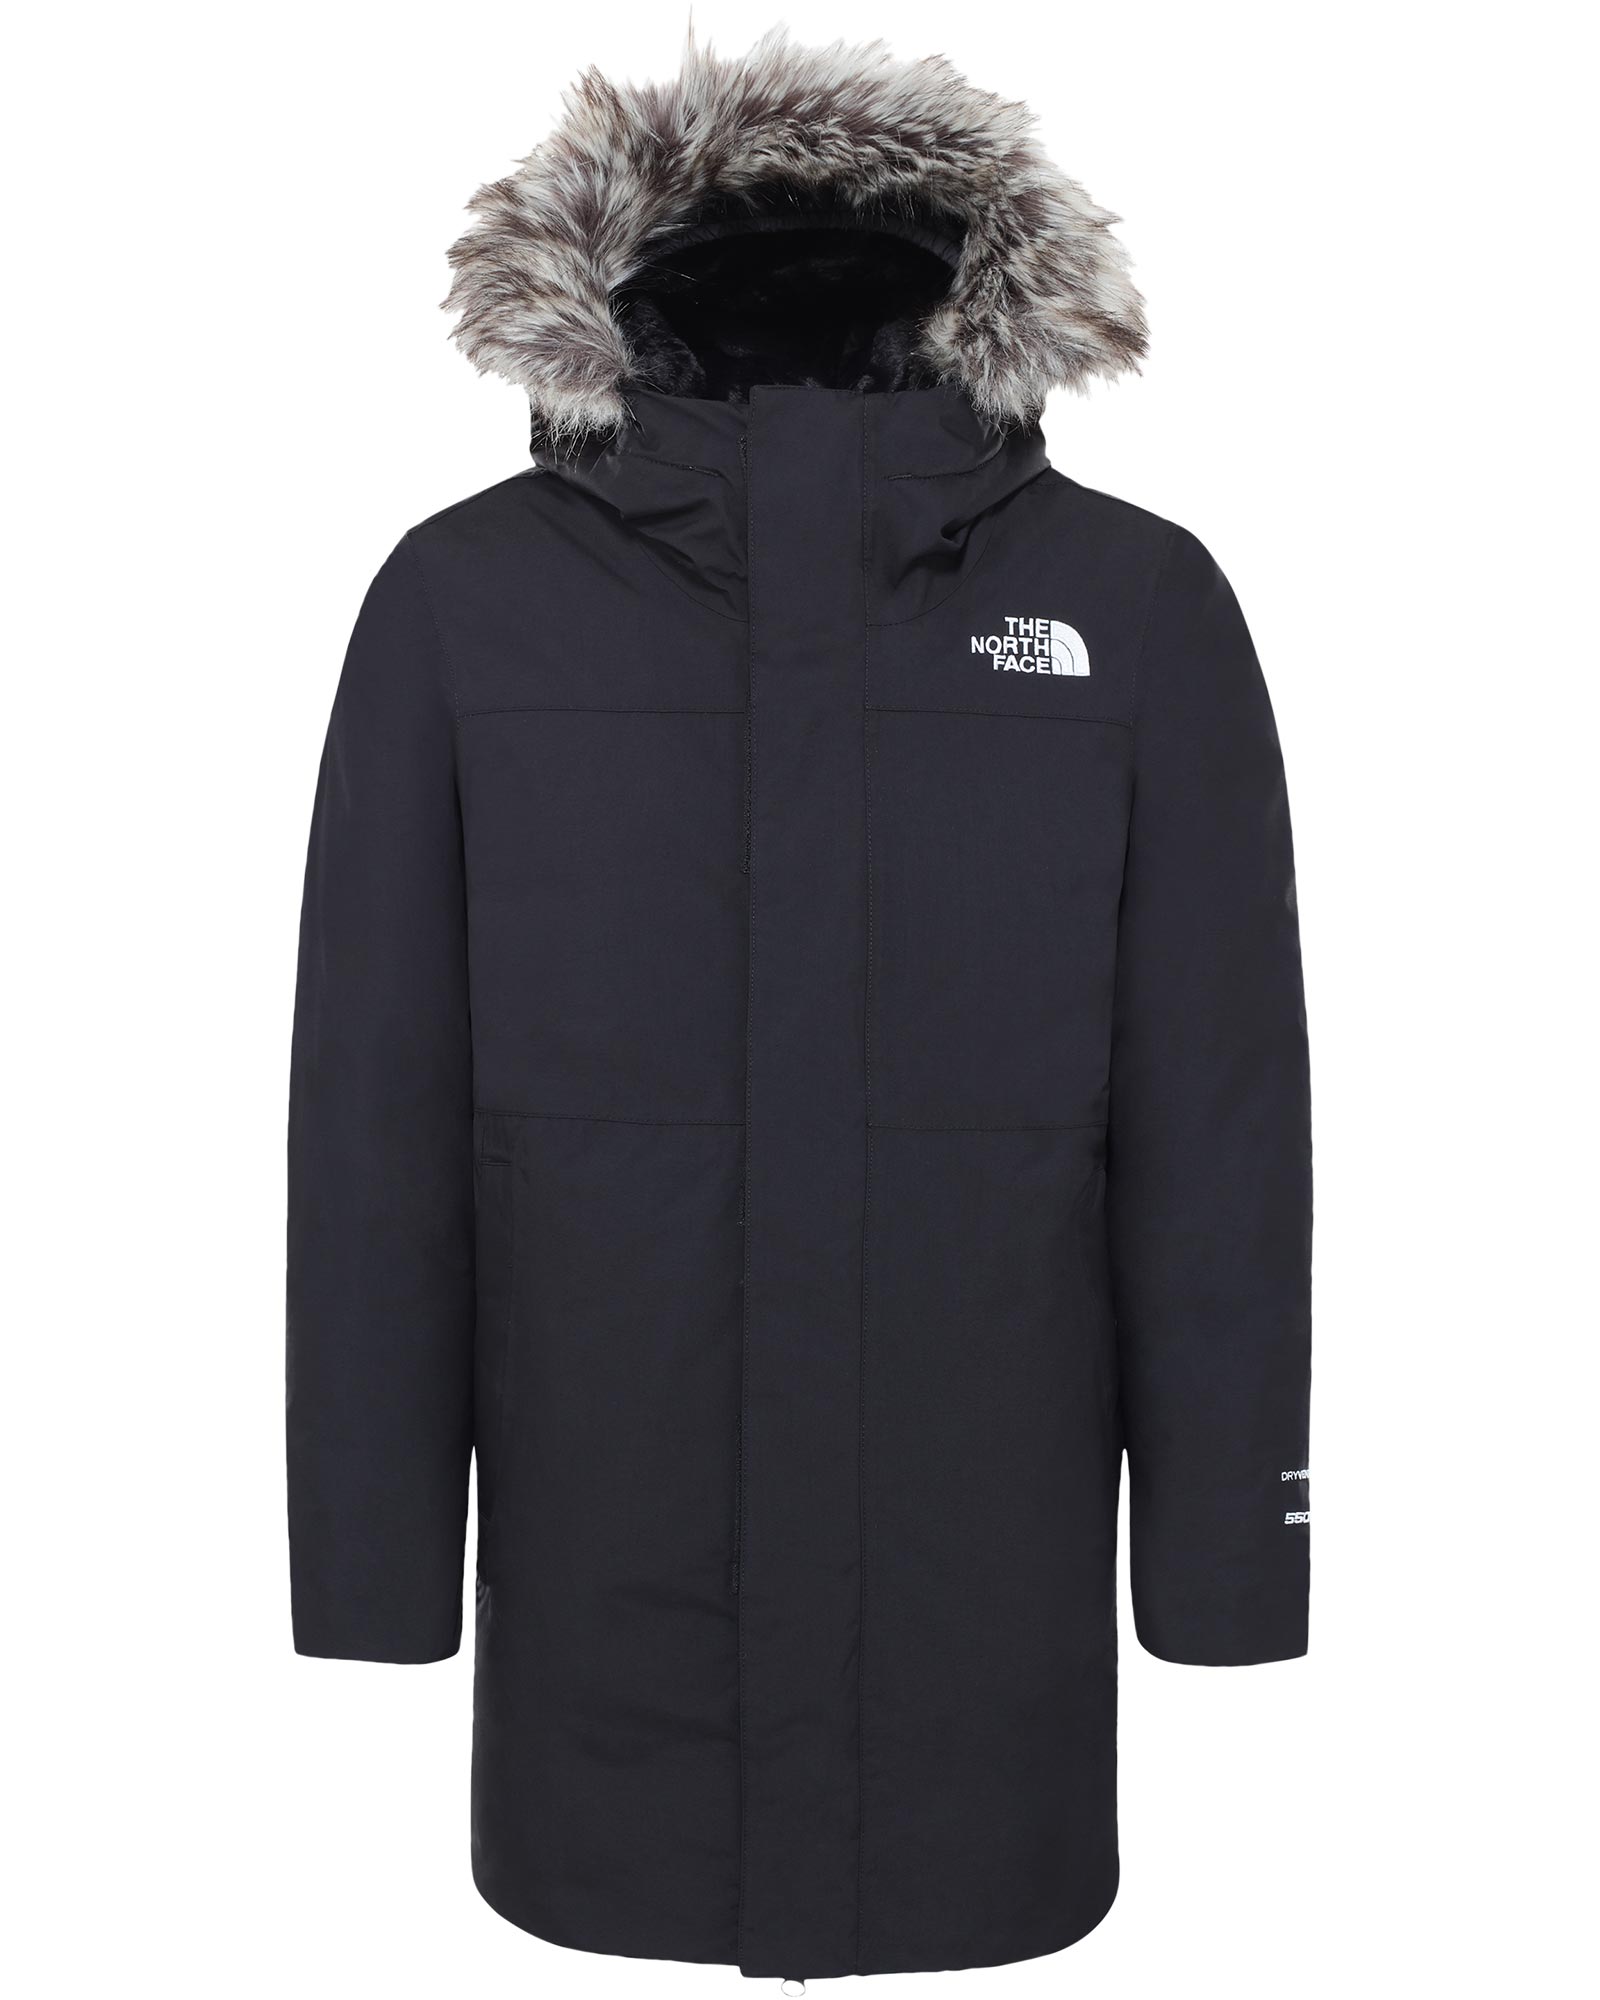 Product image of The North Face Arctic Swirl Parka Girls' Jacket